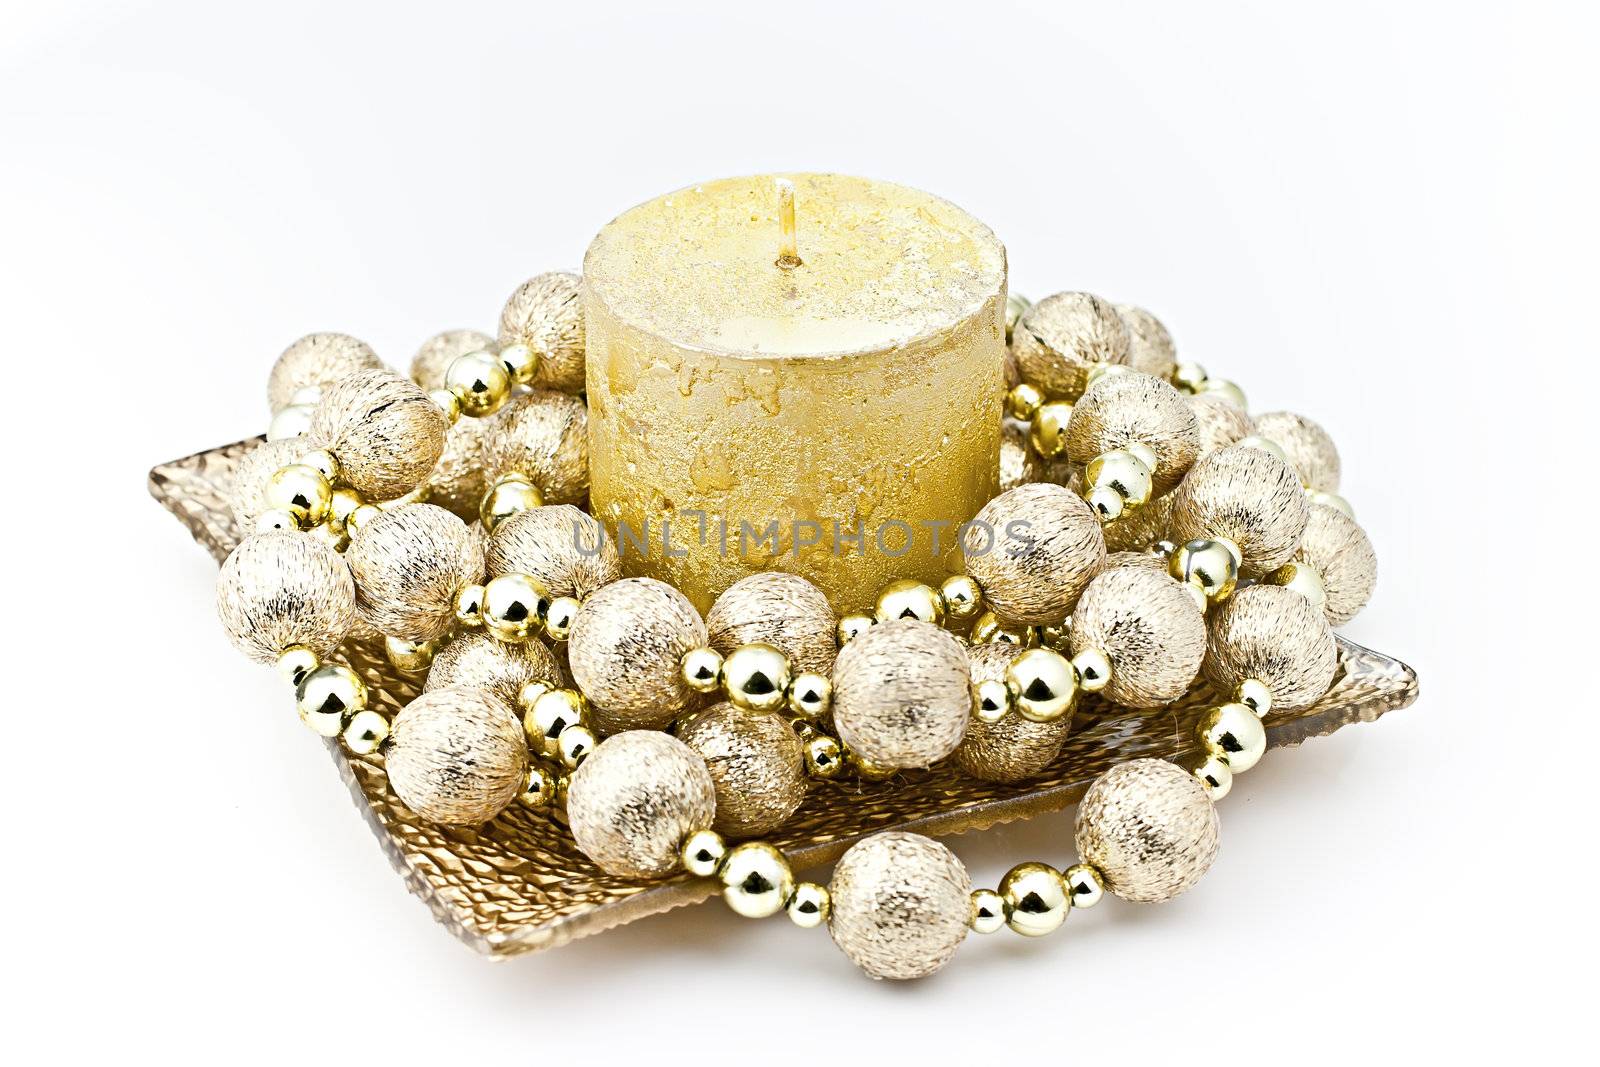 Isolated on white background gold candle in a glass dish with a decorative string of bombs.
